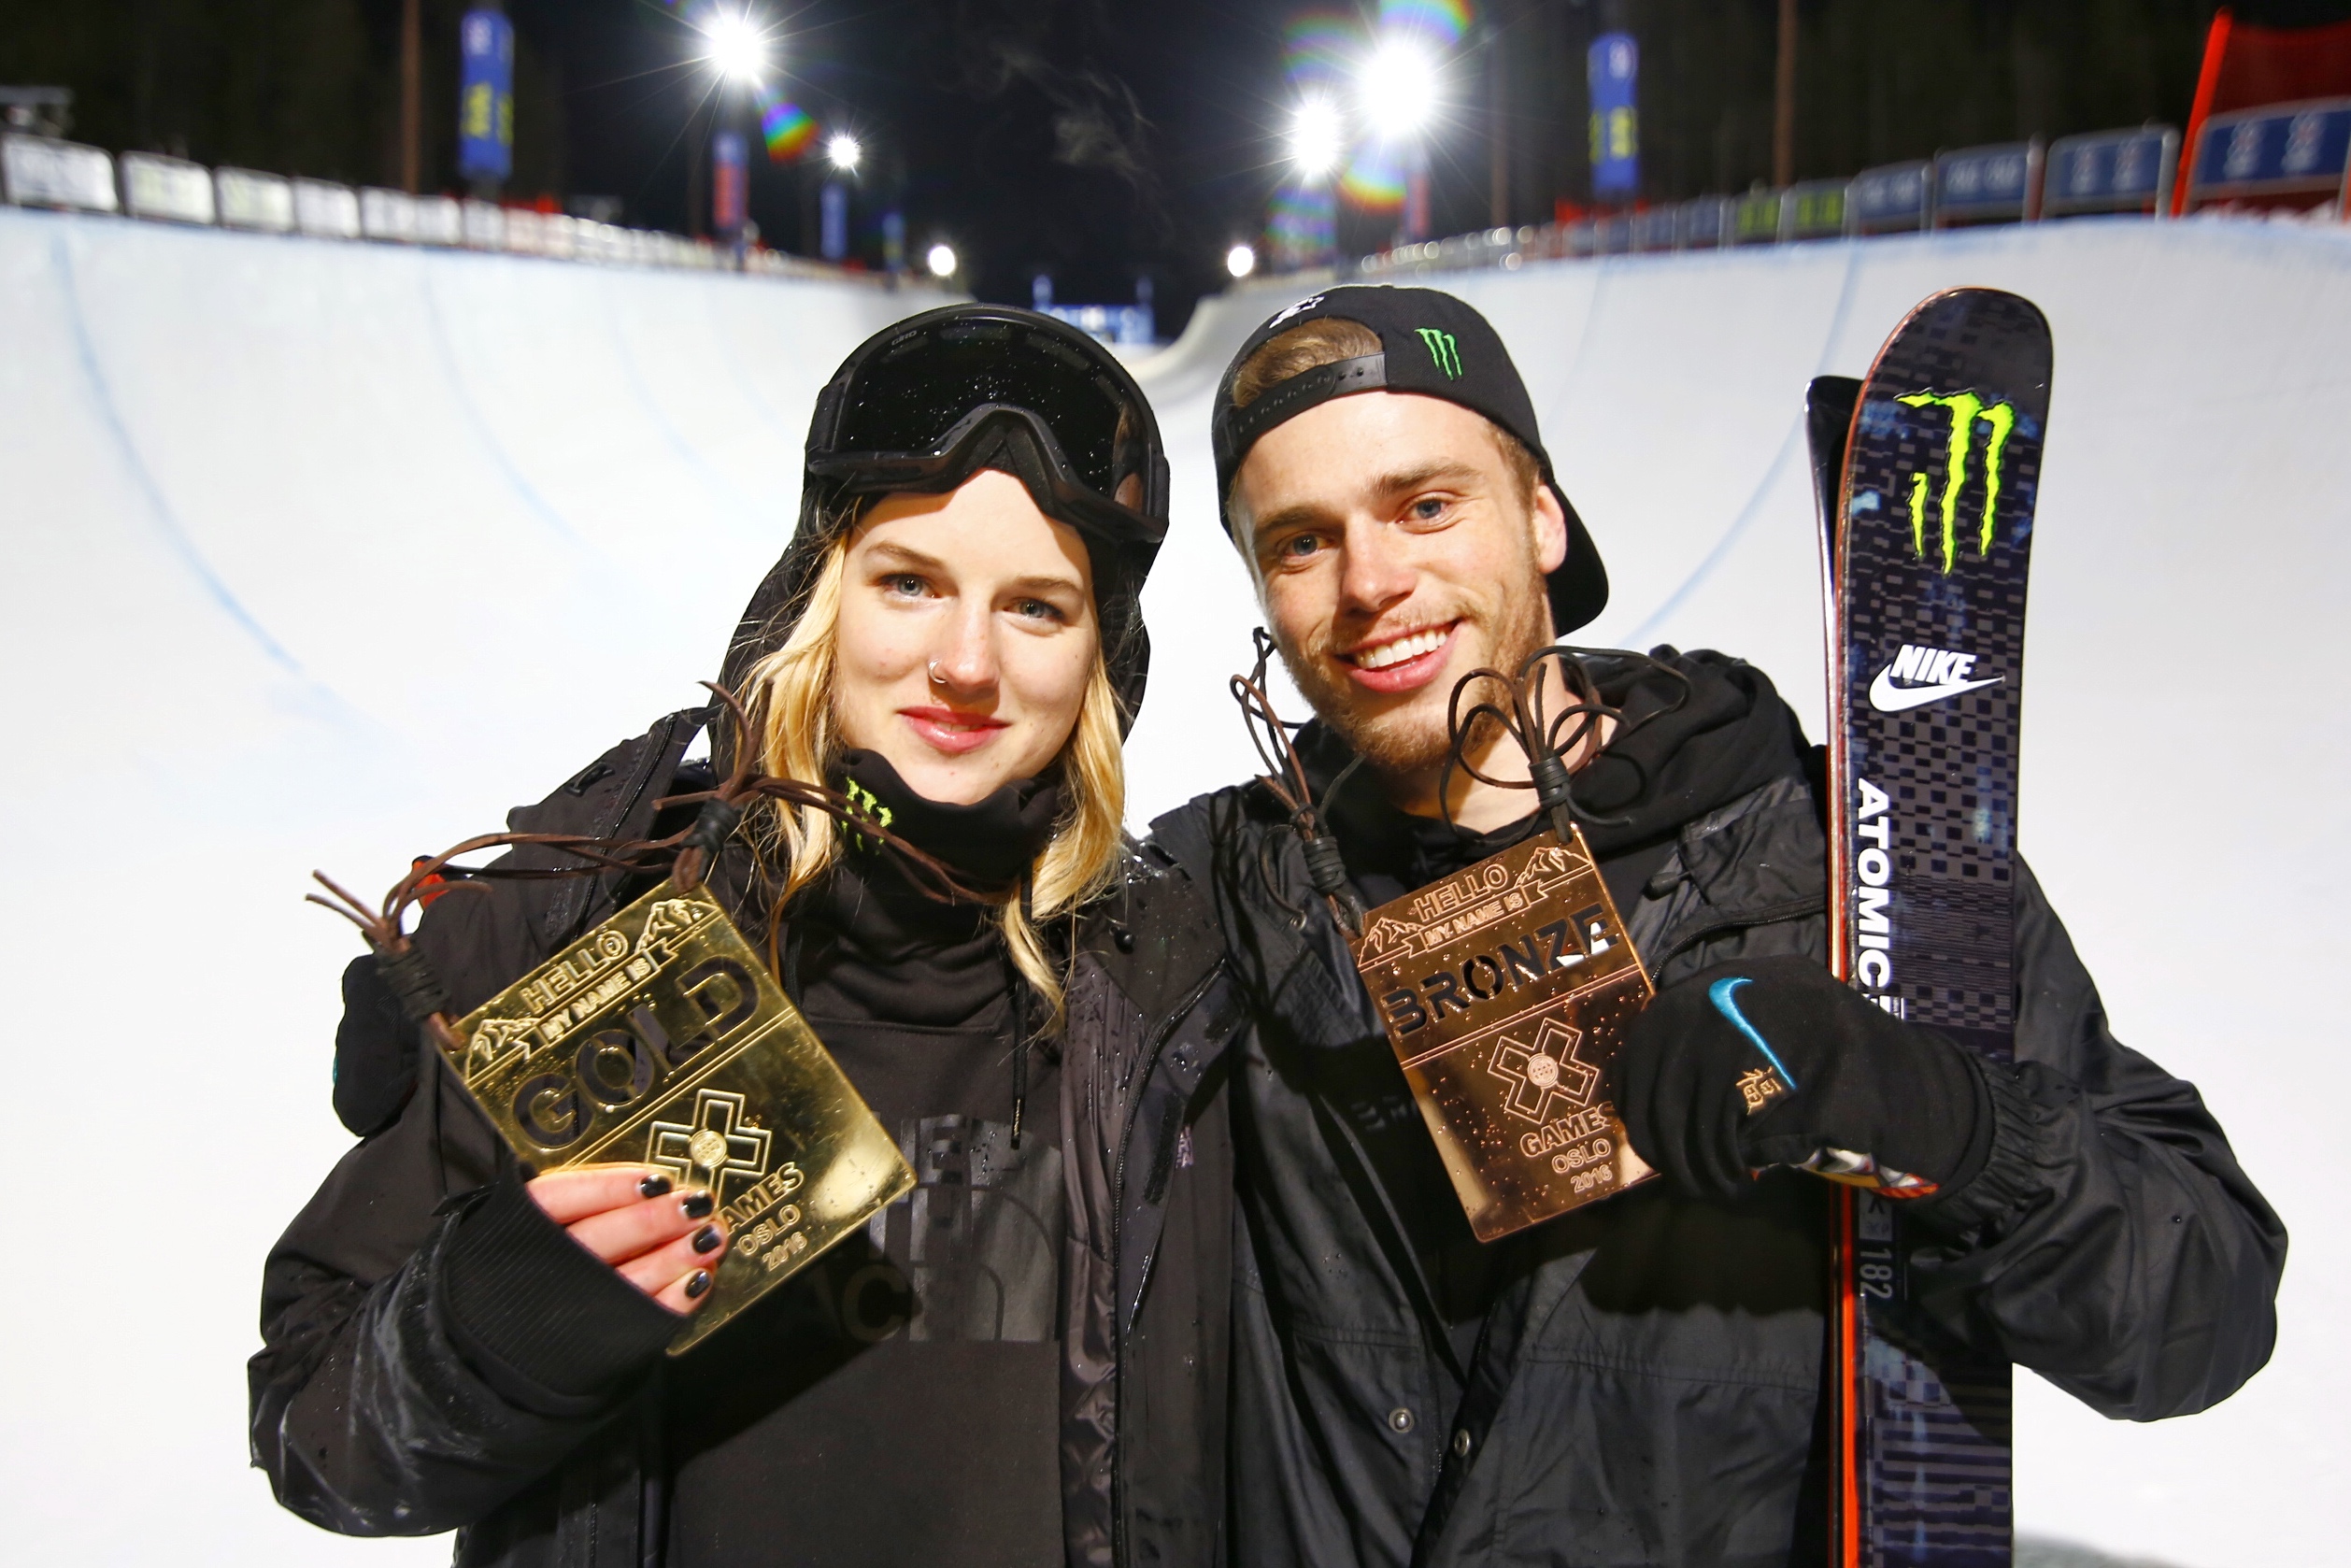 Monster Energy's Cassie Sharpe Will Compete in Women's Ski SuperPipe and Gus Kenworthy Will Compete in Men's Ski SuperPipe and Men's Ski Slopestyle